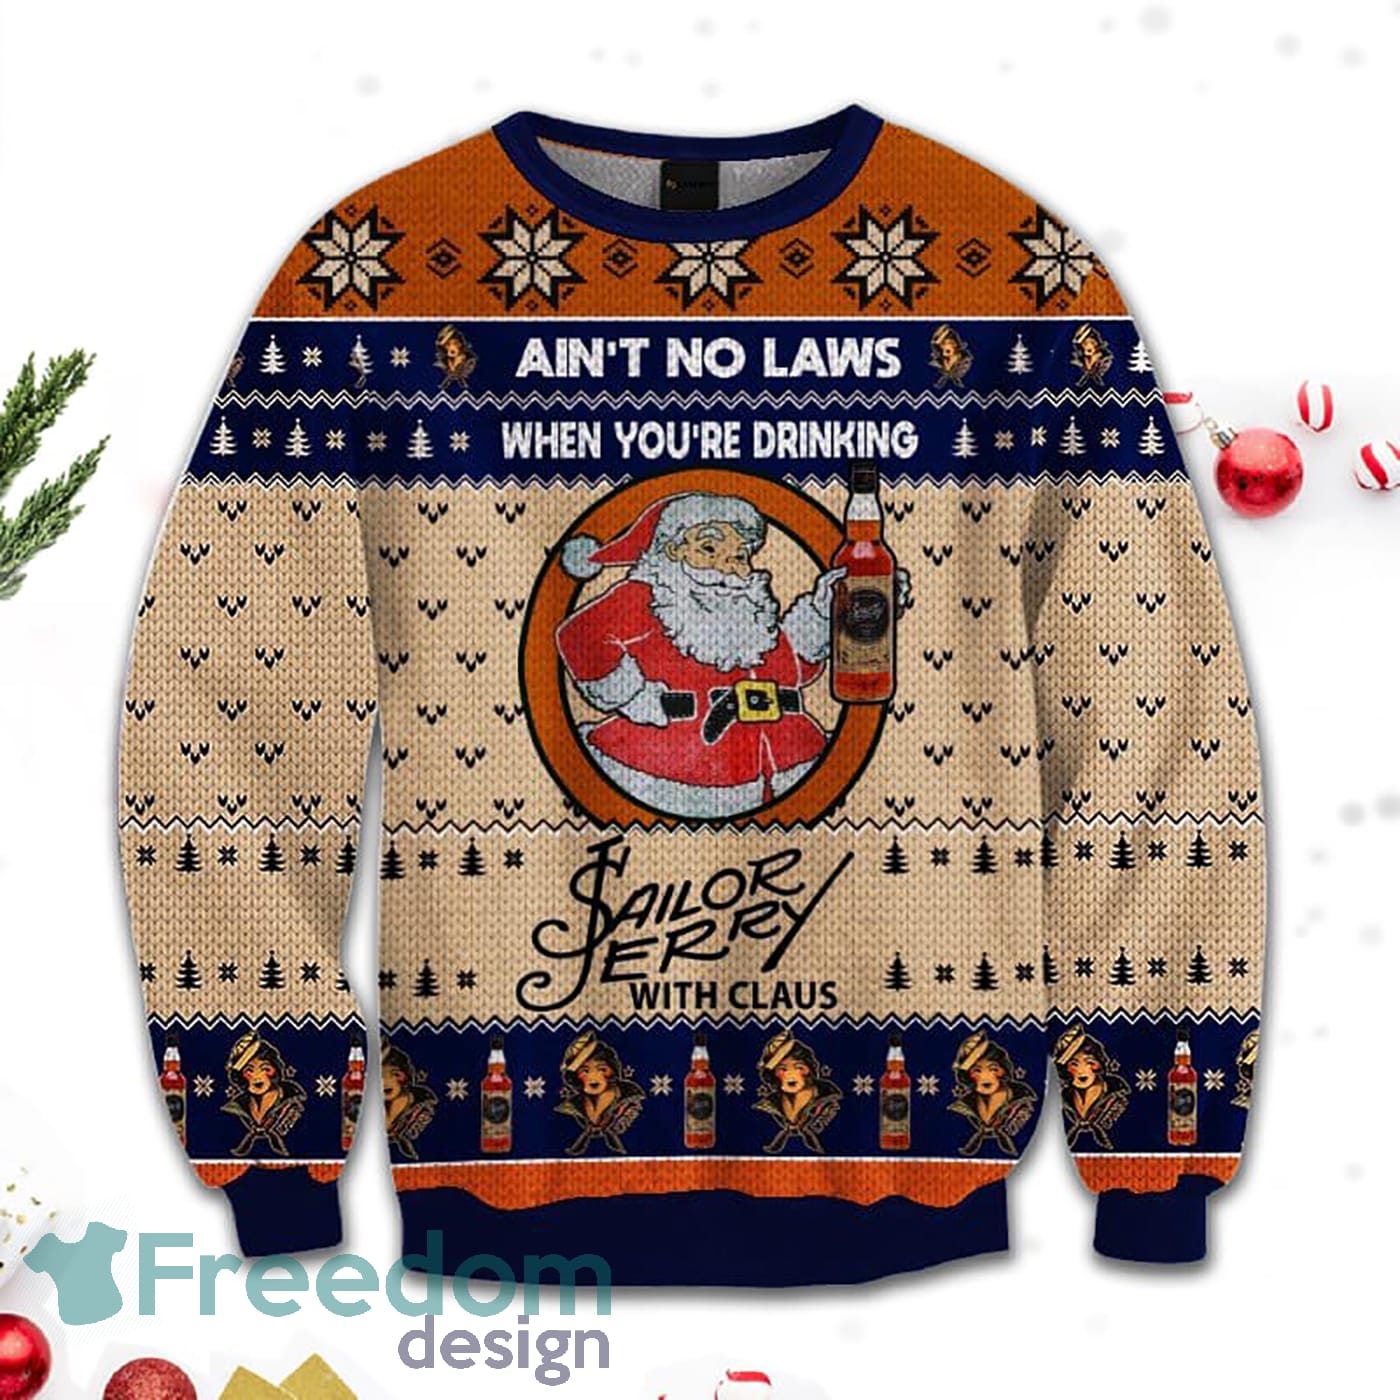 Merr Christmas Ain't No Laws When You're Drink Sailor Jerry With Claus Sweatshirt